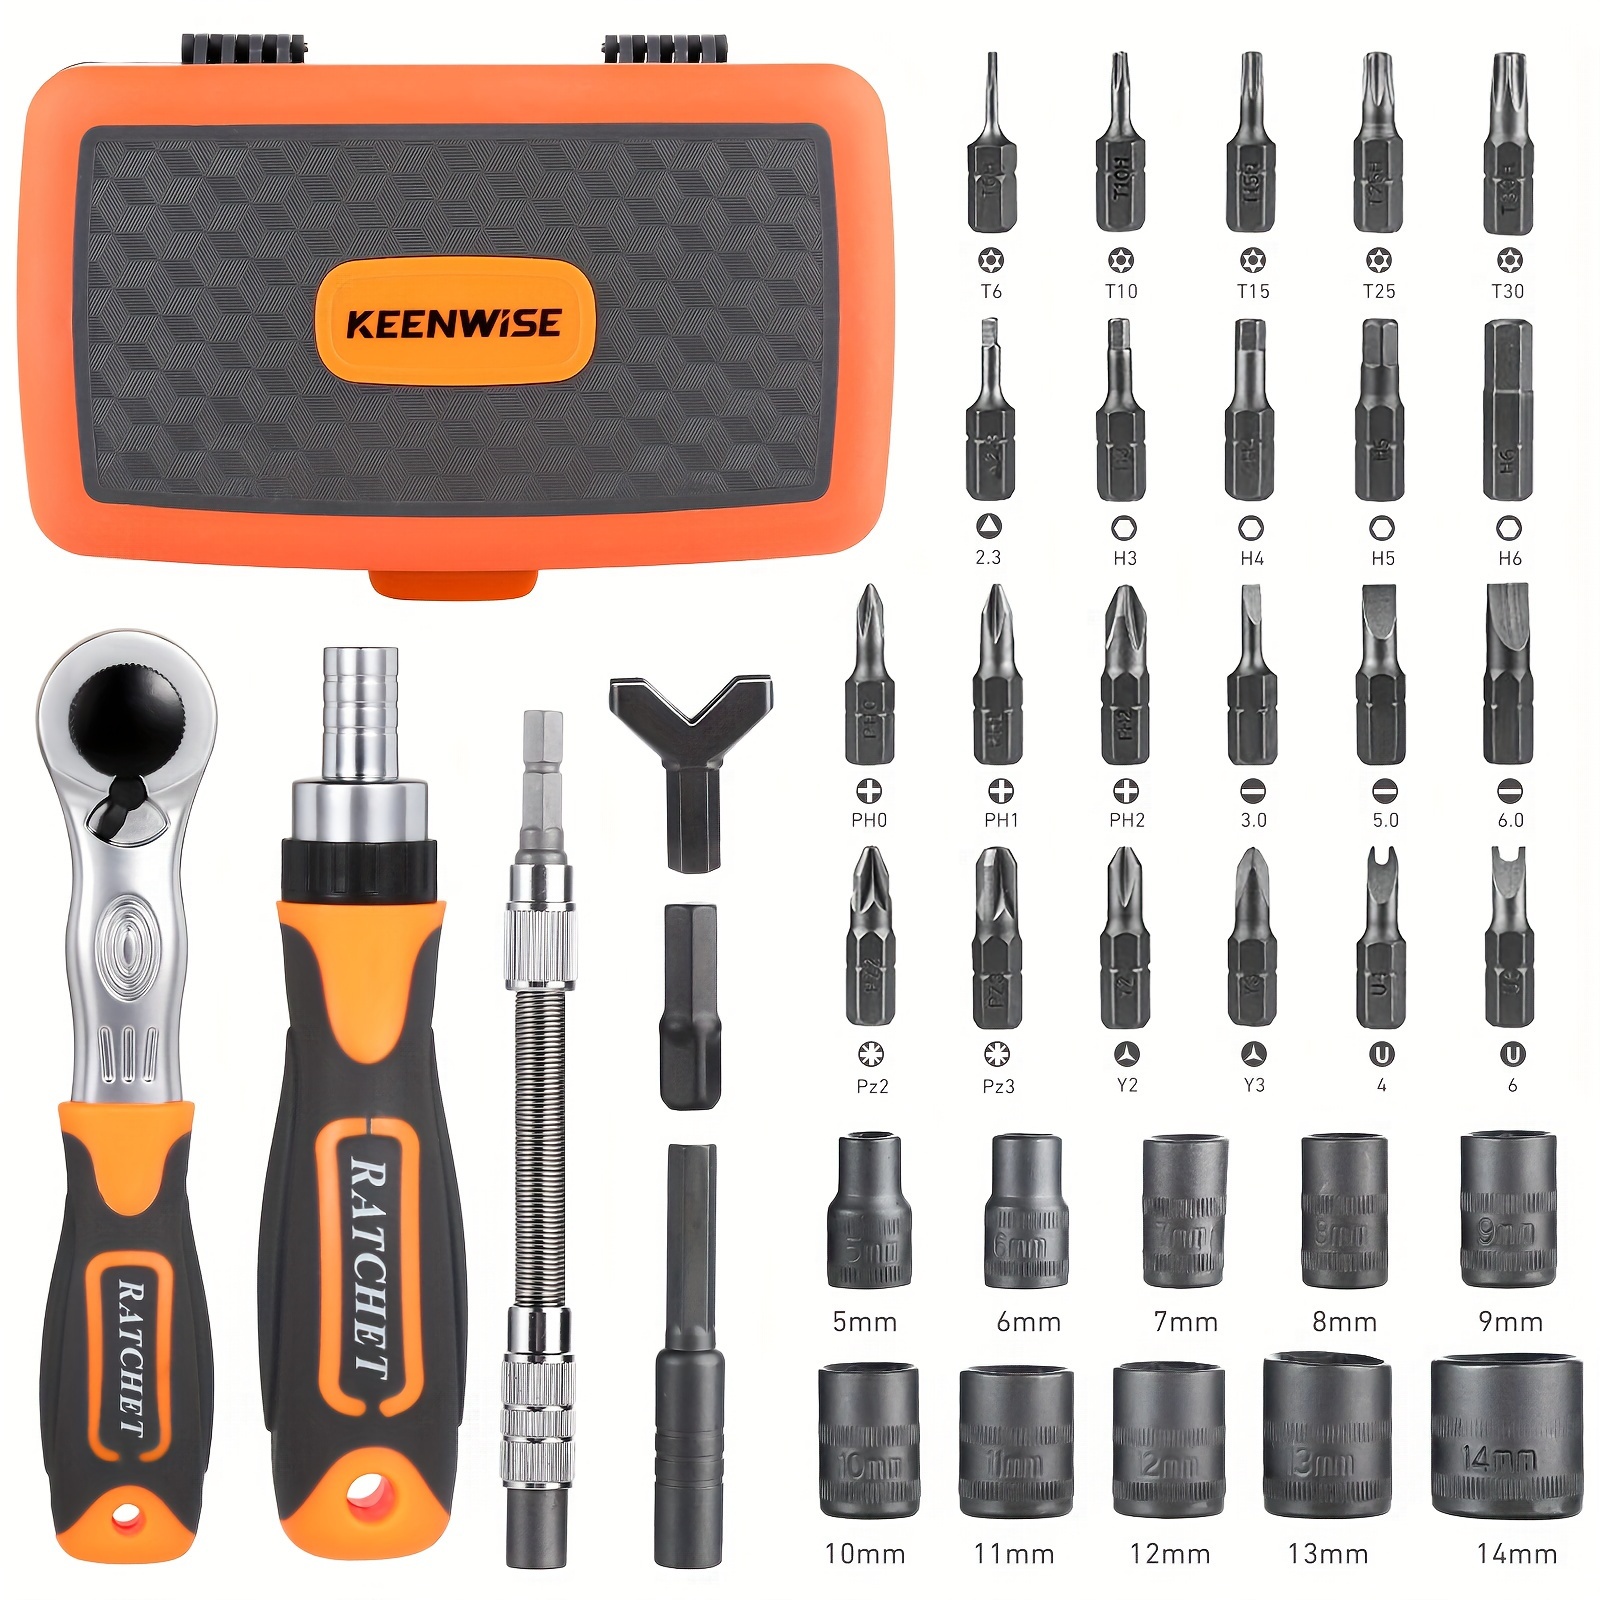 

Ratcheting Screwdriver Set: Keenwise 38-in-1 Ratchet Screwdriver Tools Versatile Magnetic Tools For Mechanics And Diy Enthusiasts (2880b)